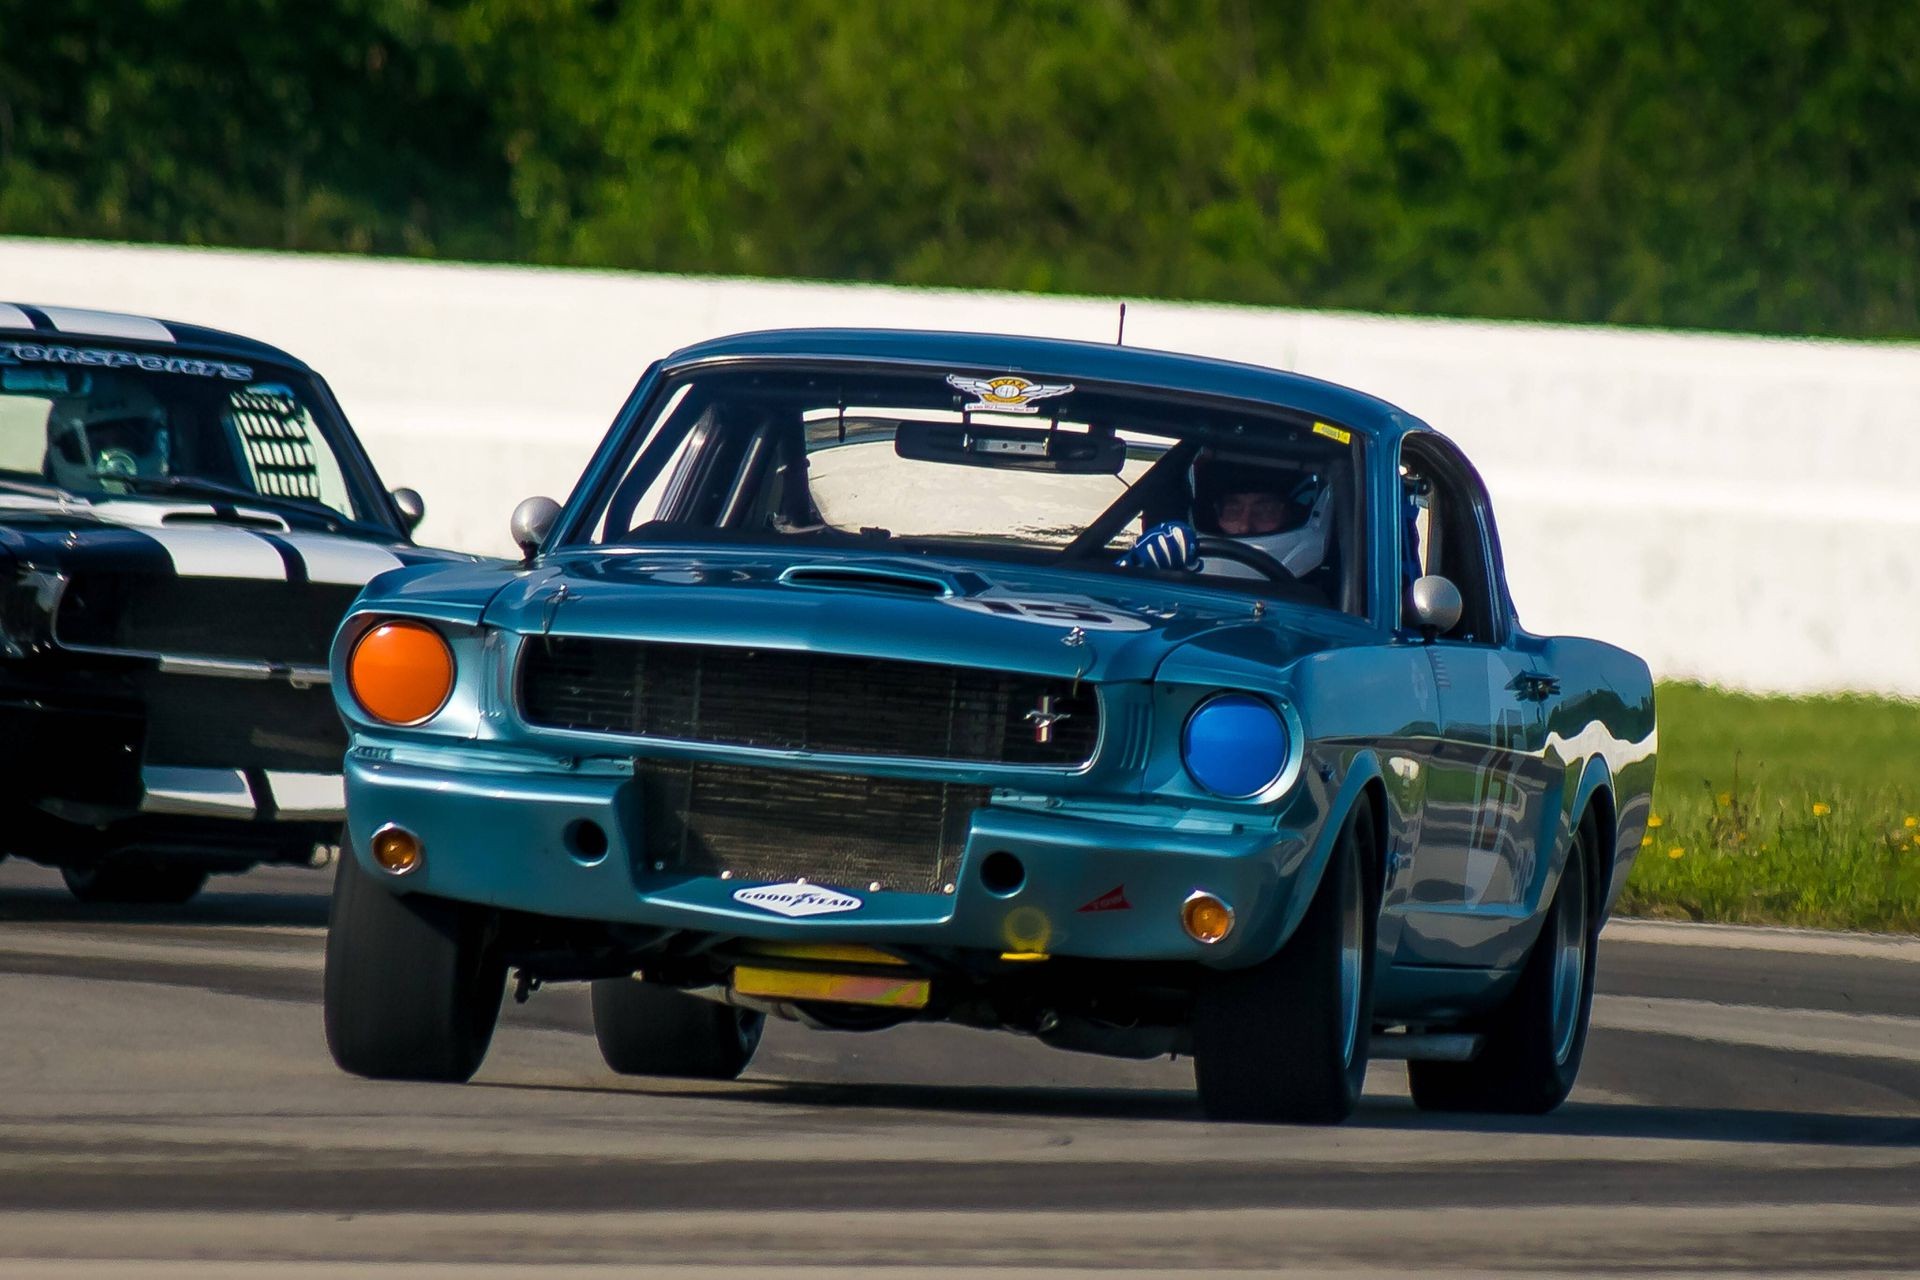 Find of the Day: This 1966 Ford Mustang 2+2 Fastback is Vintage Racing Ready